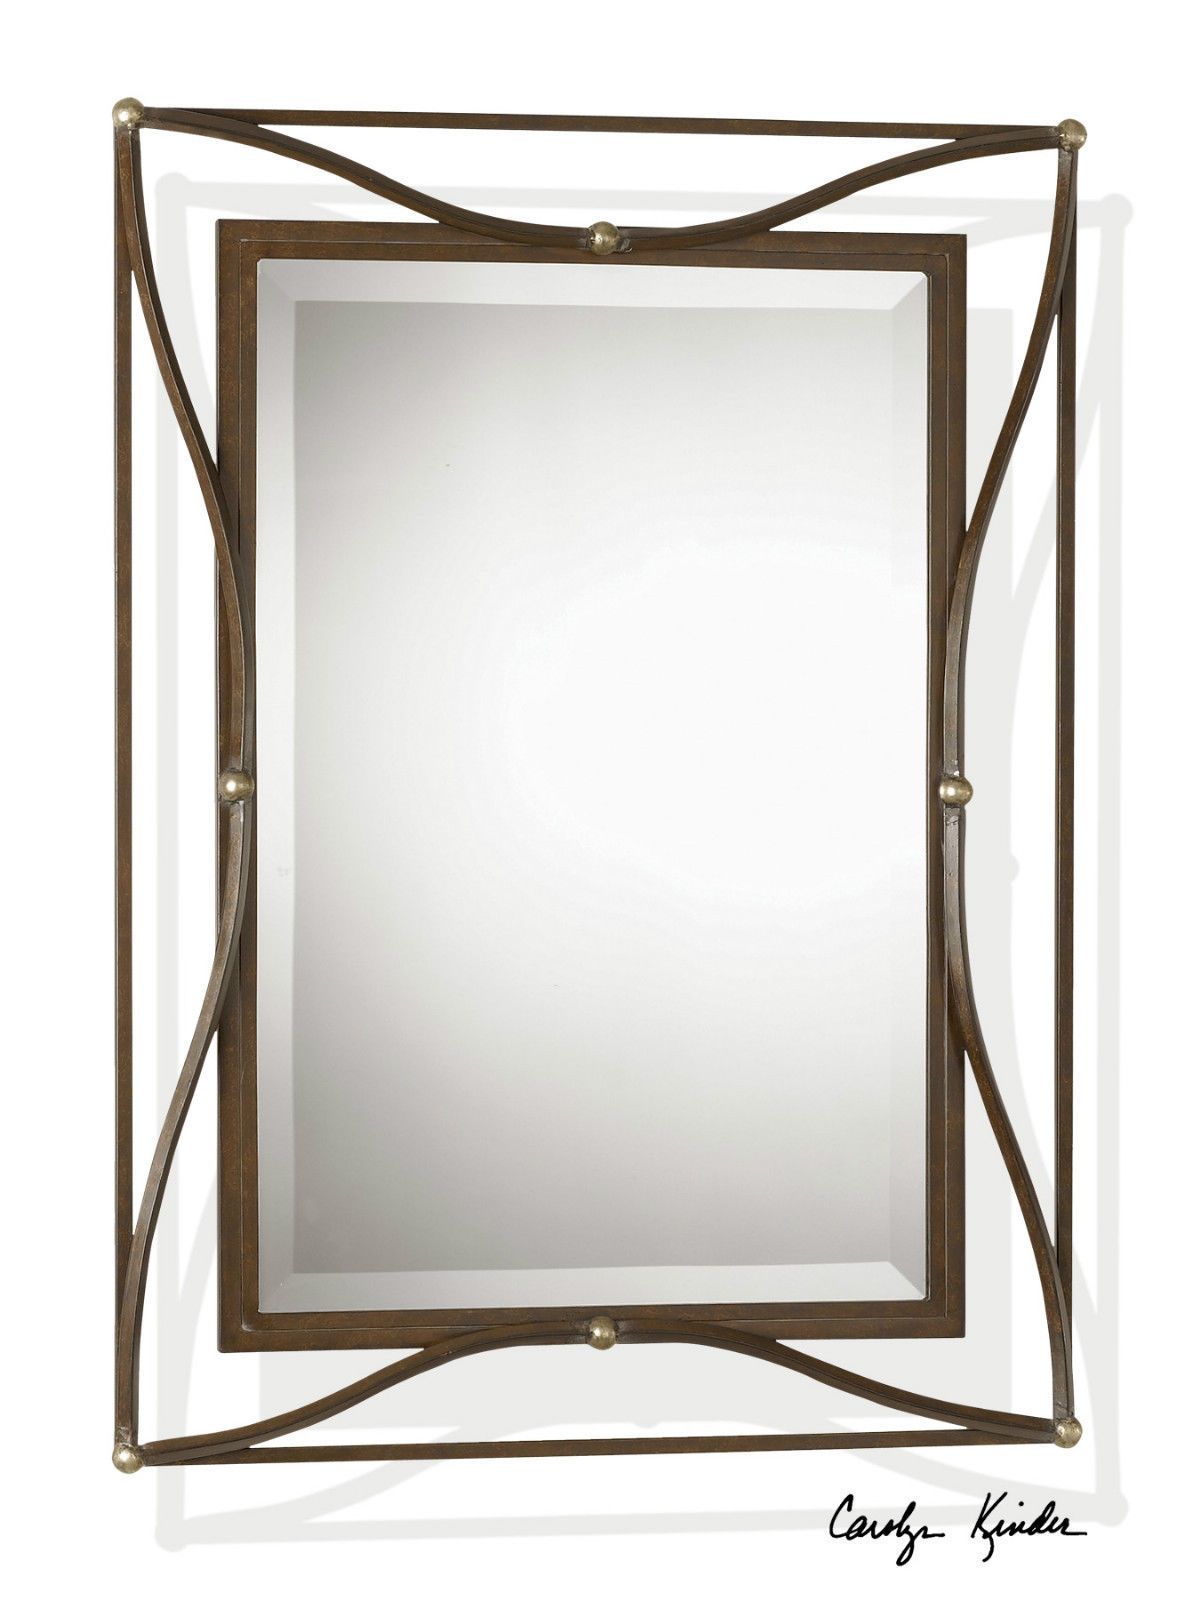 Two New 38" Aged Bronze Iron Rectangular Beveled Wall Mirror Western Regarding Western Wall Mirrors (View 6 of 15)